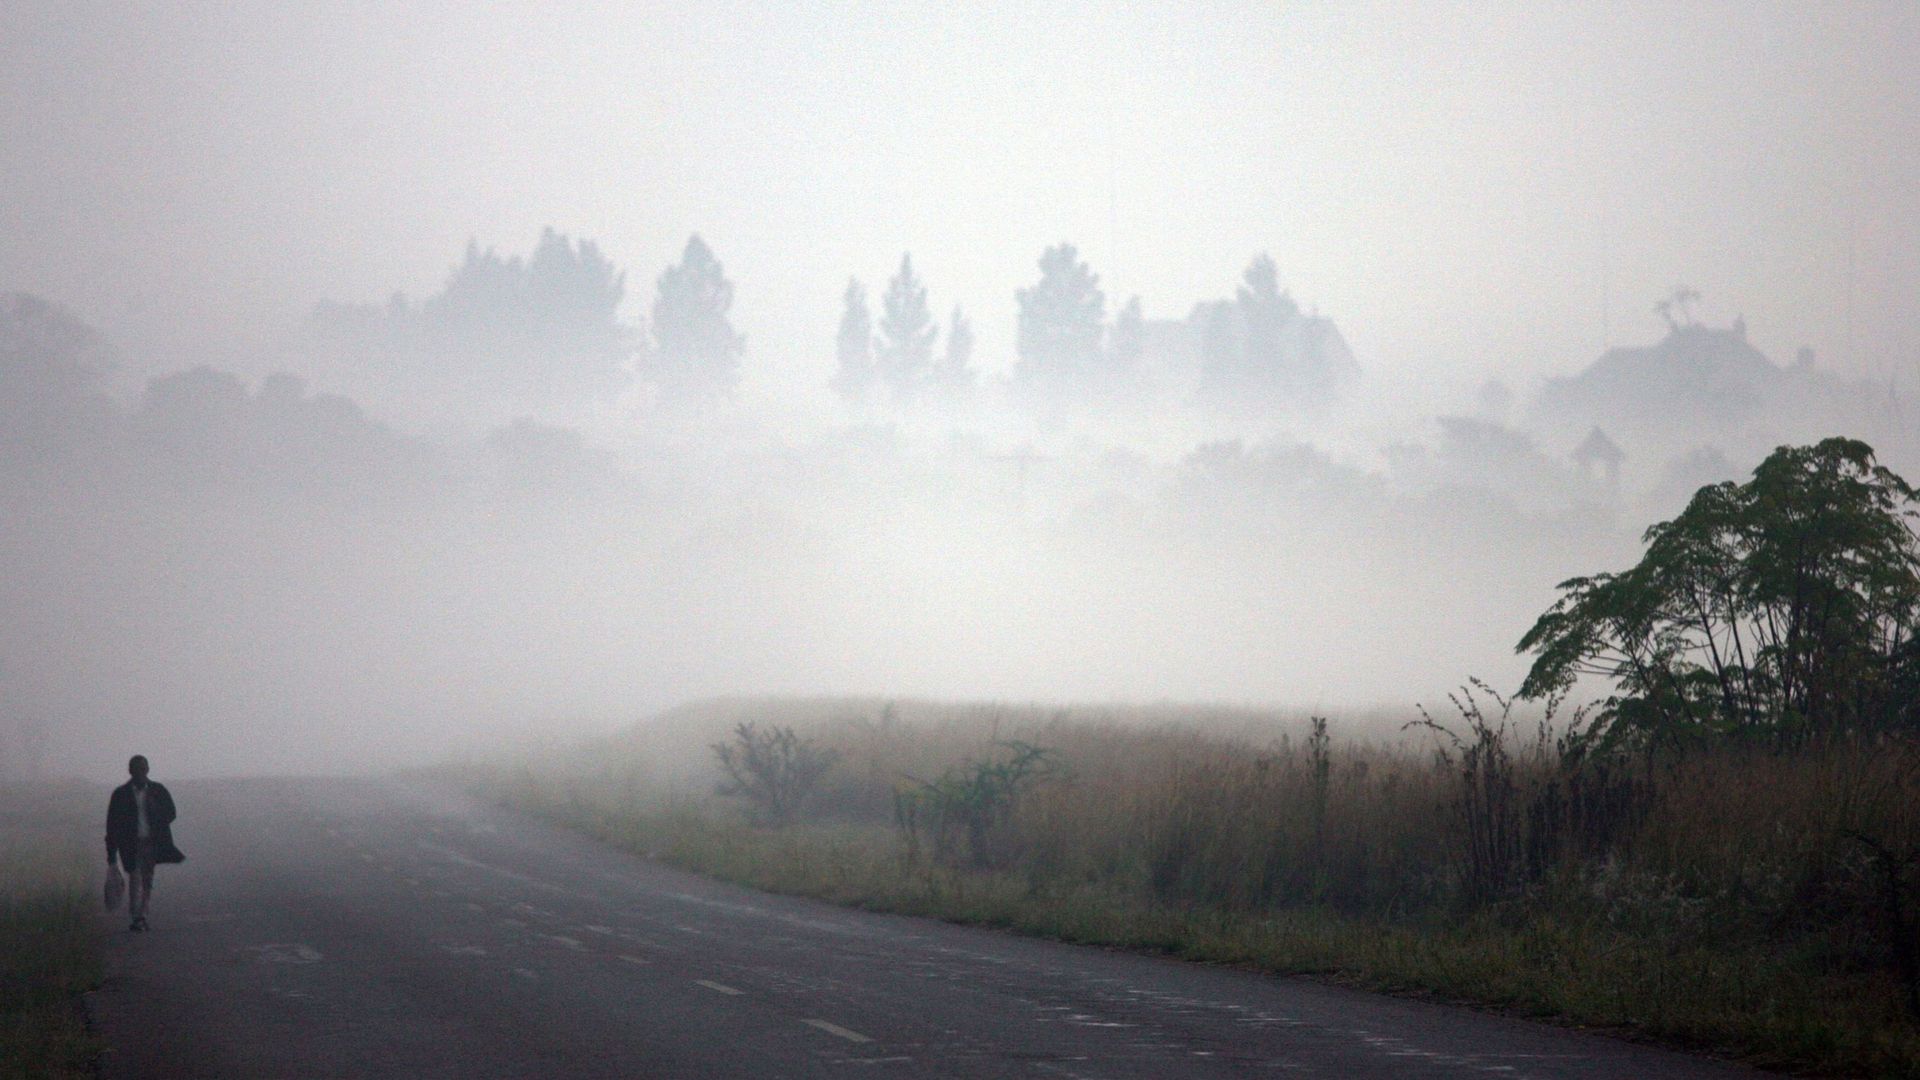 A South African man walks to work through early morning mist in the Cradle of Humankind, north-west of Johannesburg, South Africa, ahead of Earth Day on April 22